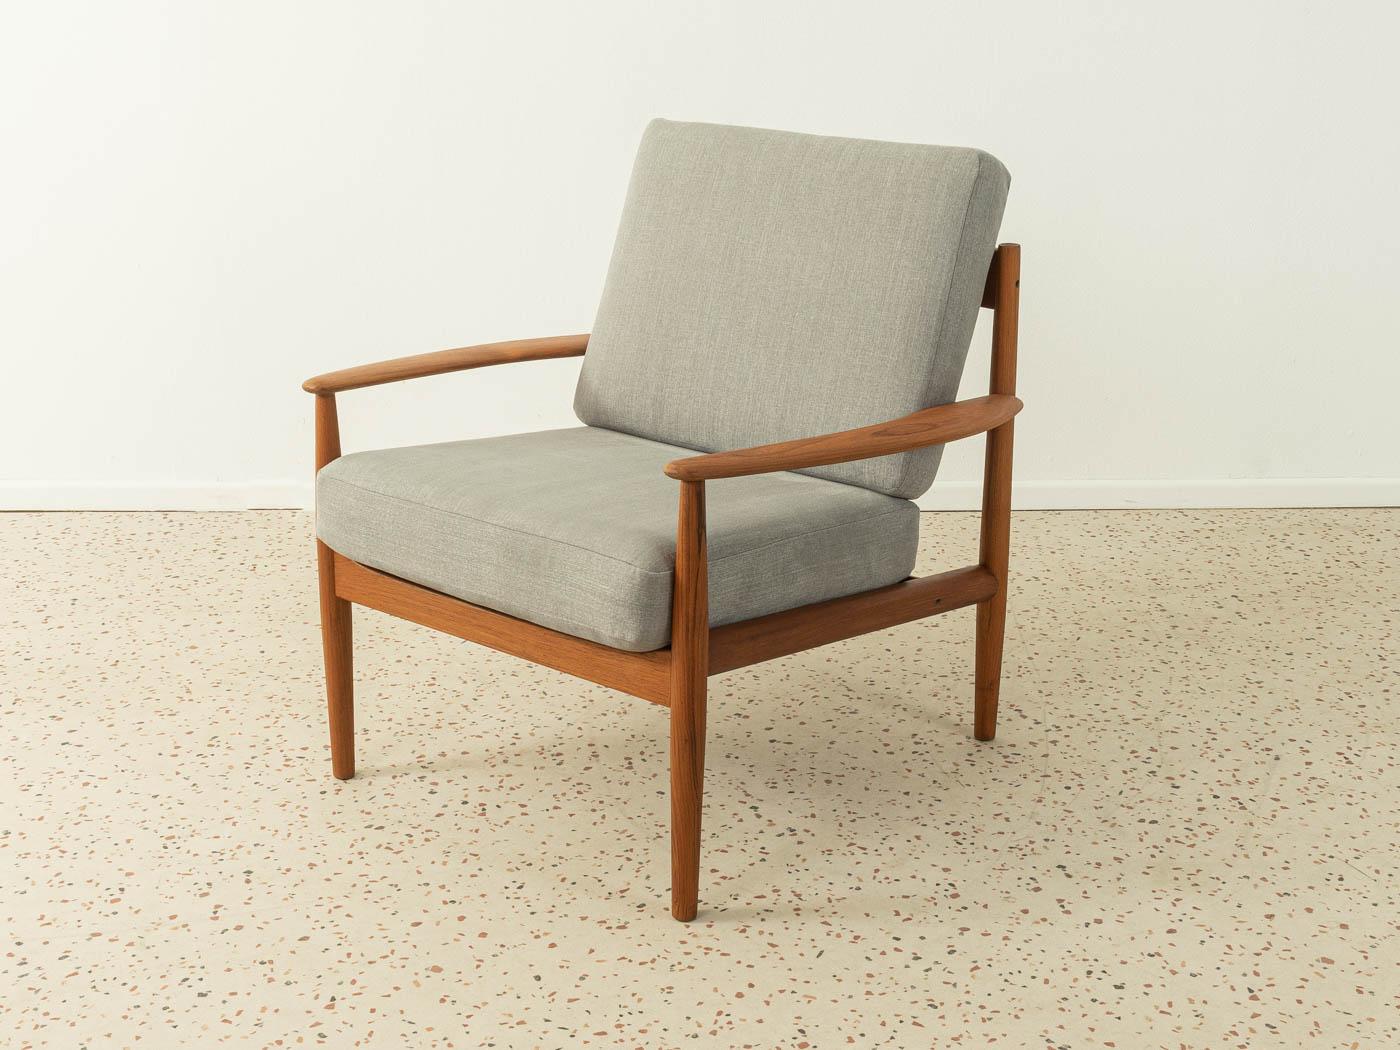 Classic armchair by Grete Jalk for Cado. High-quality solid wood frame made of teak. The original spring cores of the seat and backrest have been reupholstered and covered with a high-quality grey upholstery fabric.

Quality Features:
- very good